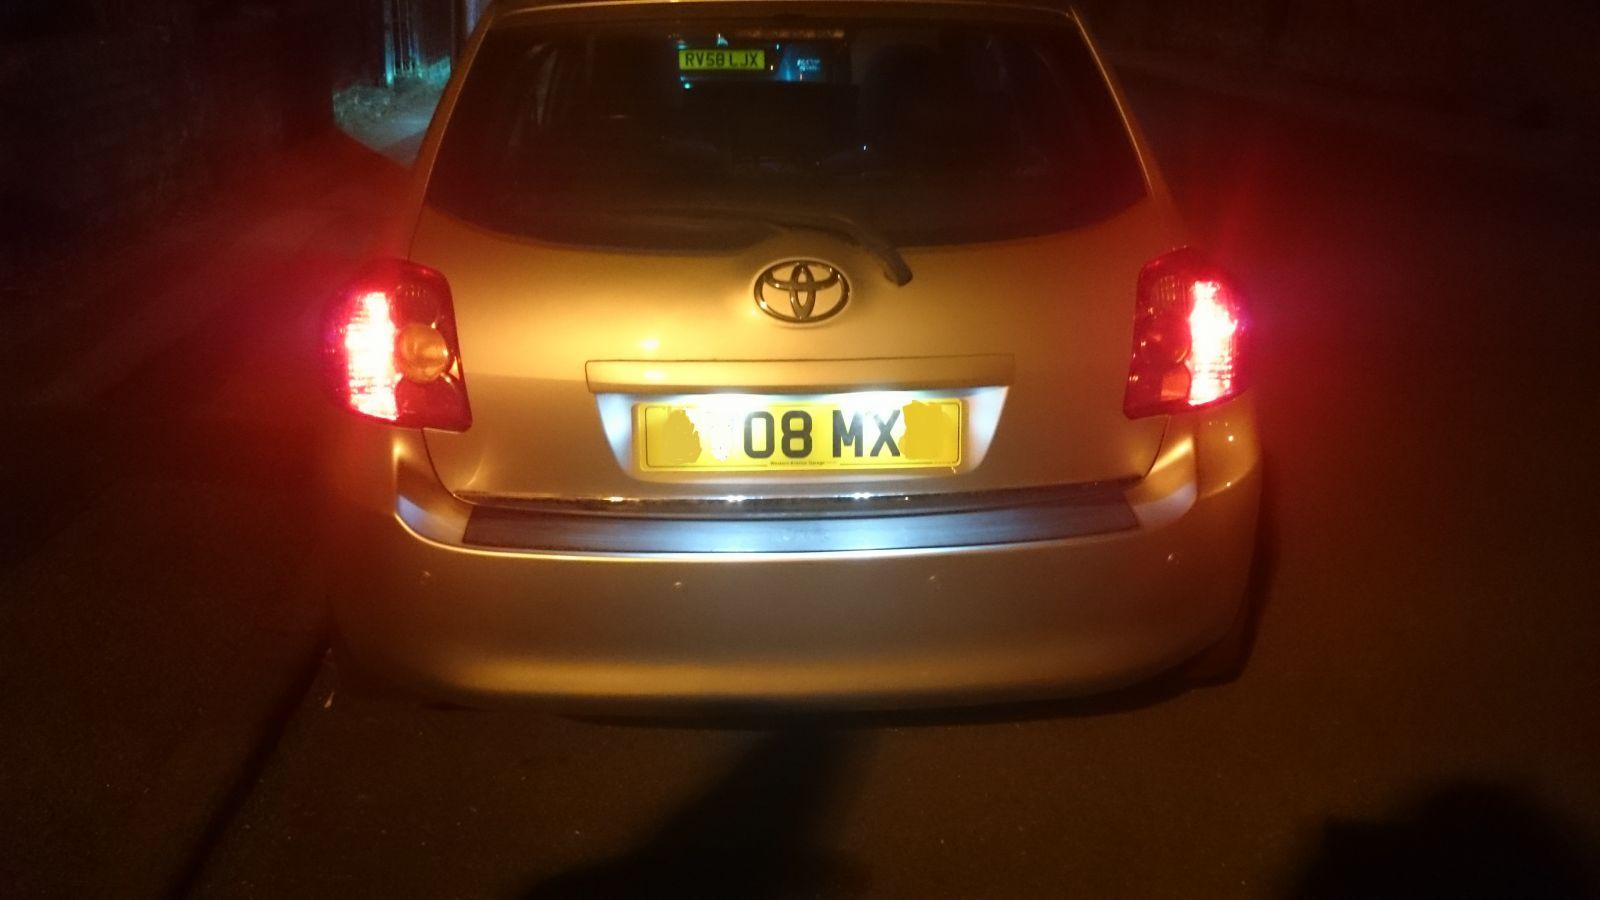 LED number plate